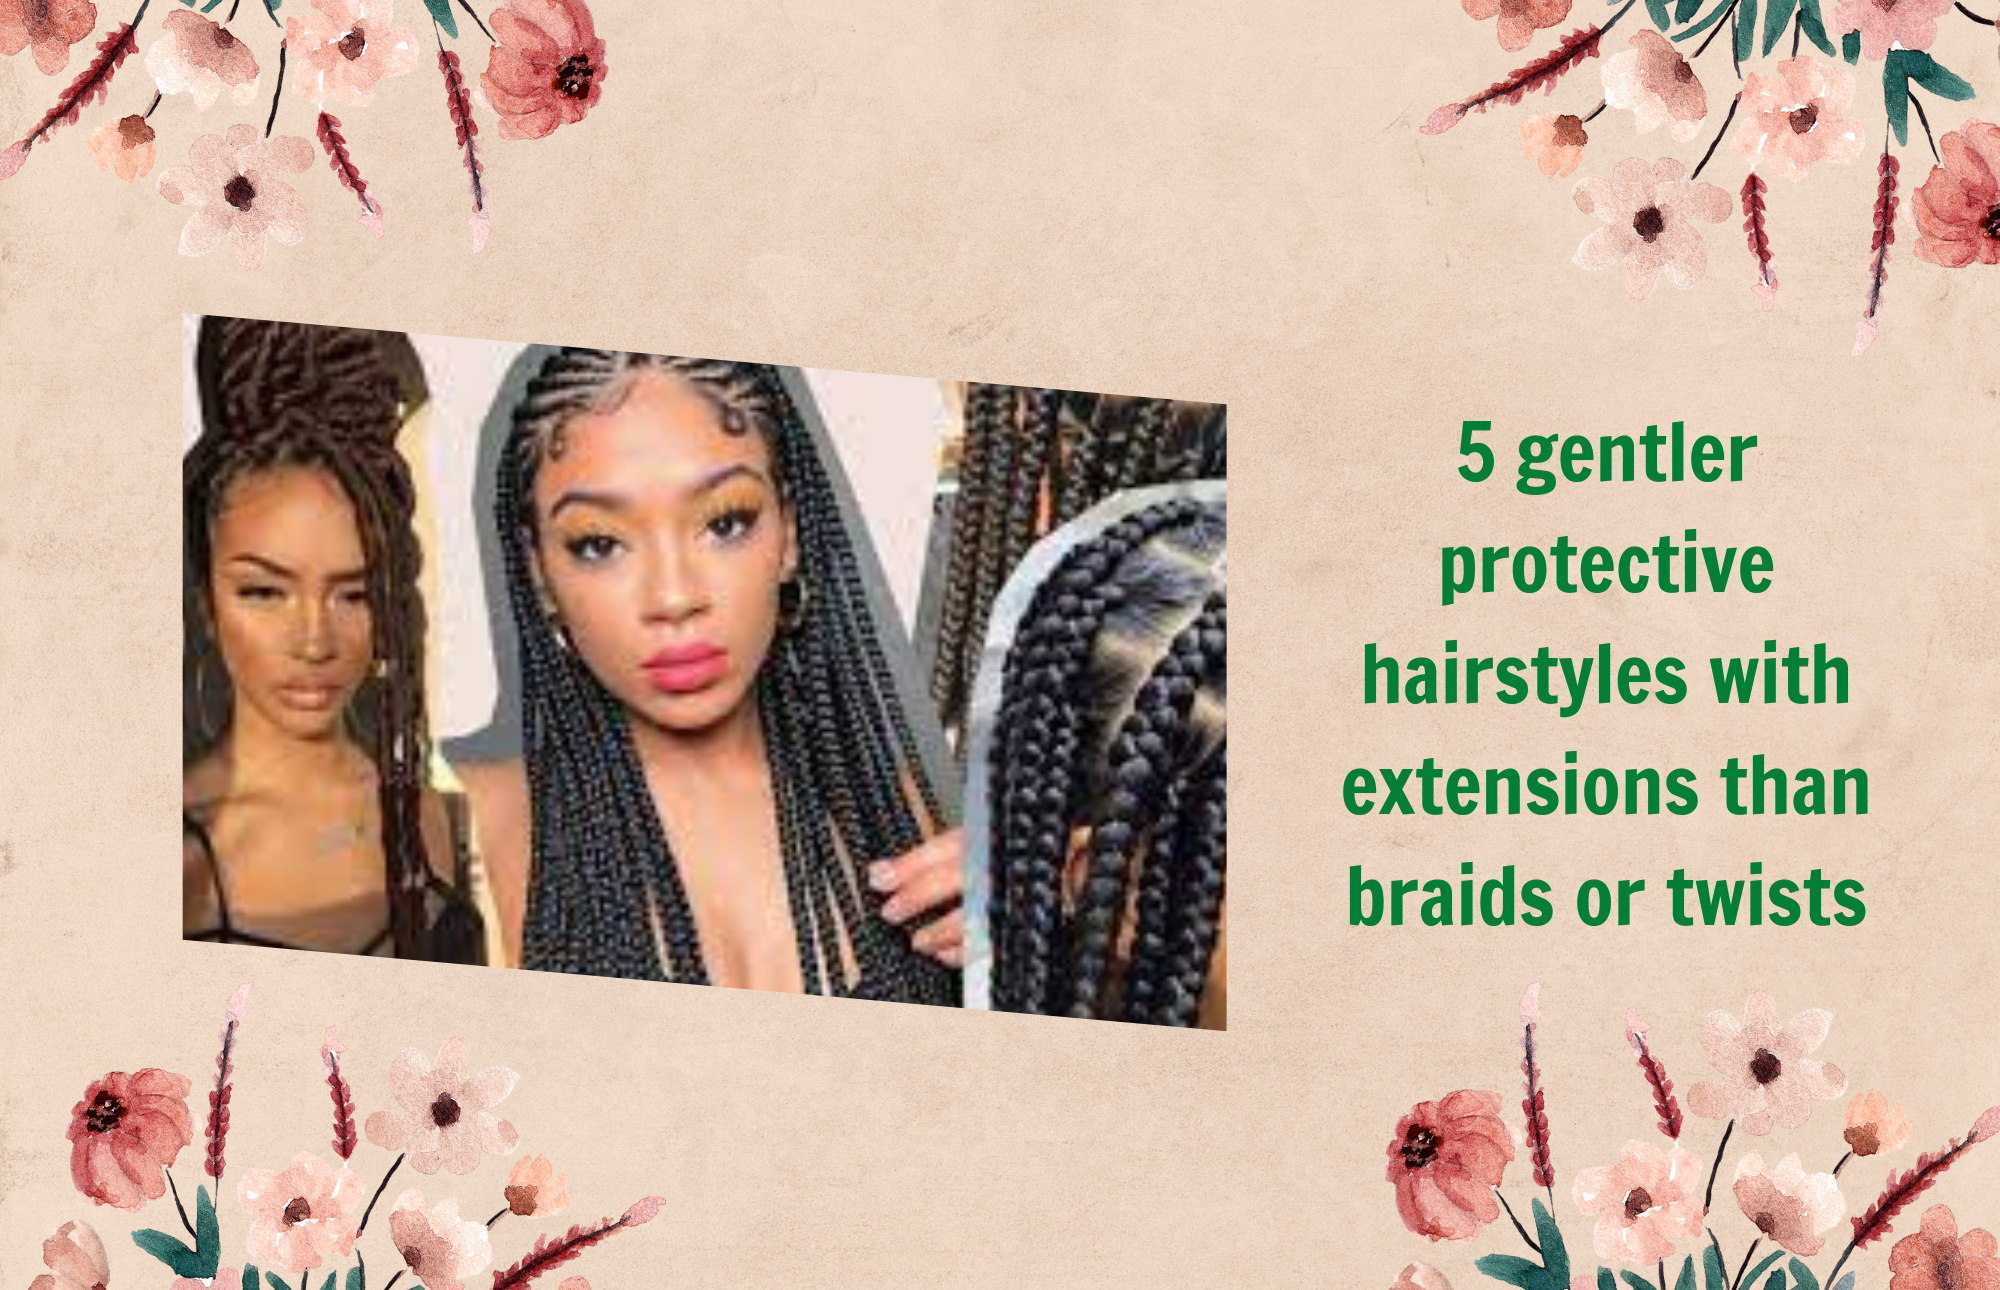 5-gentler-protective-hairstyles-with-extensions-than-braids-or-twists12